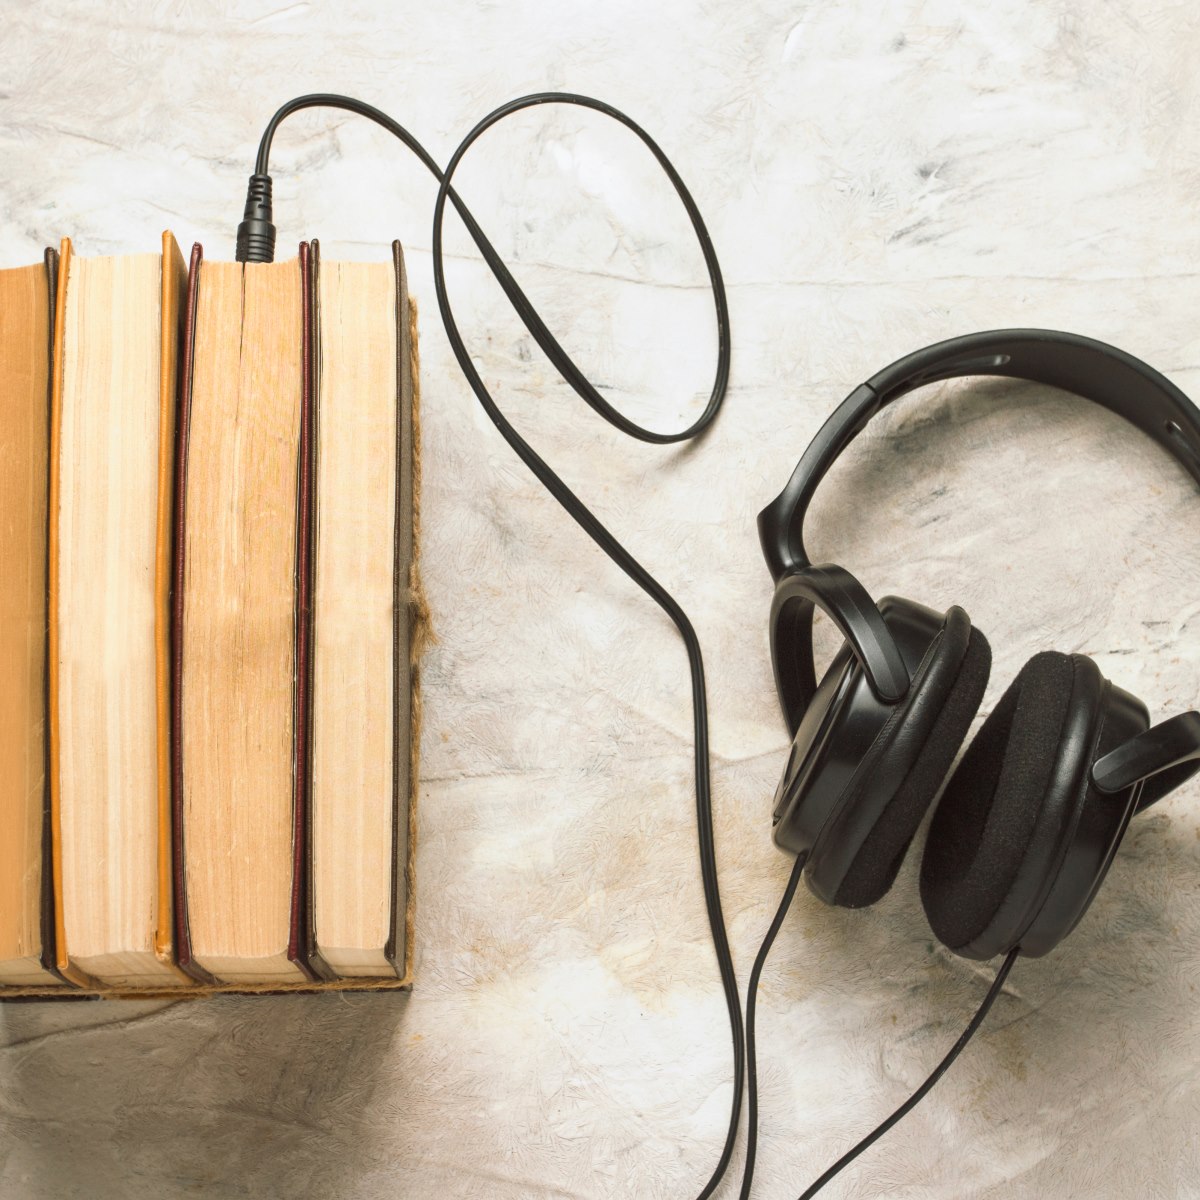 14 Unbelievable Free Audio Books For Kindle for 2023